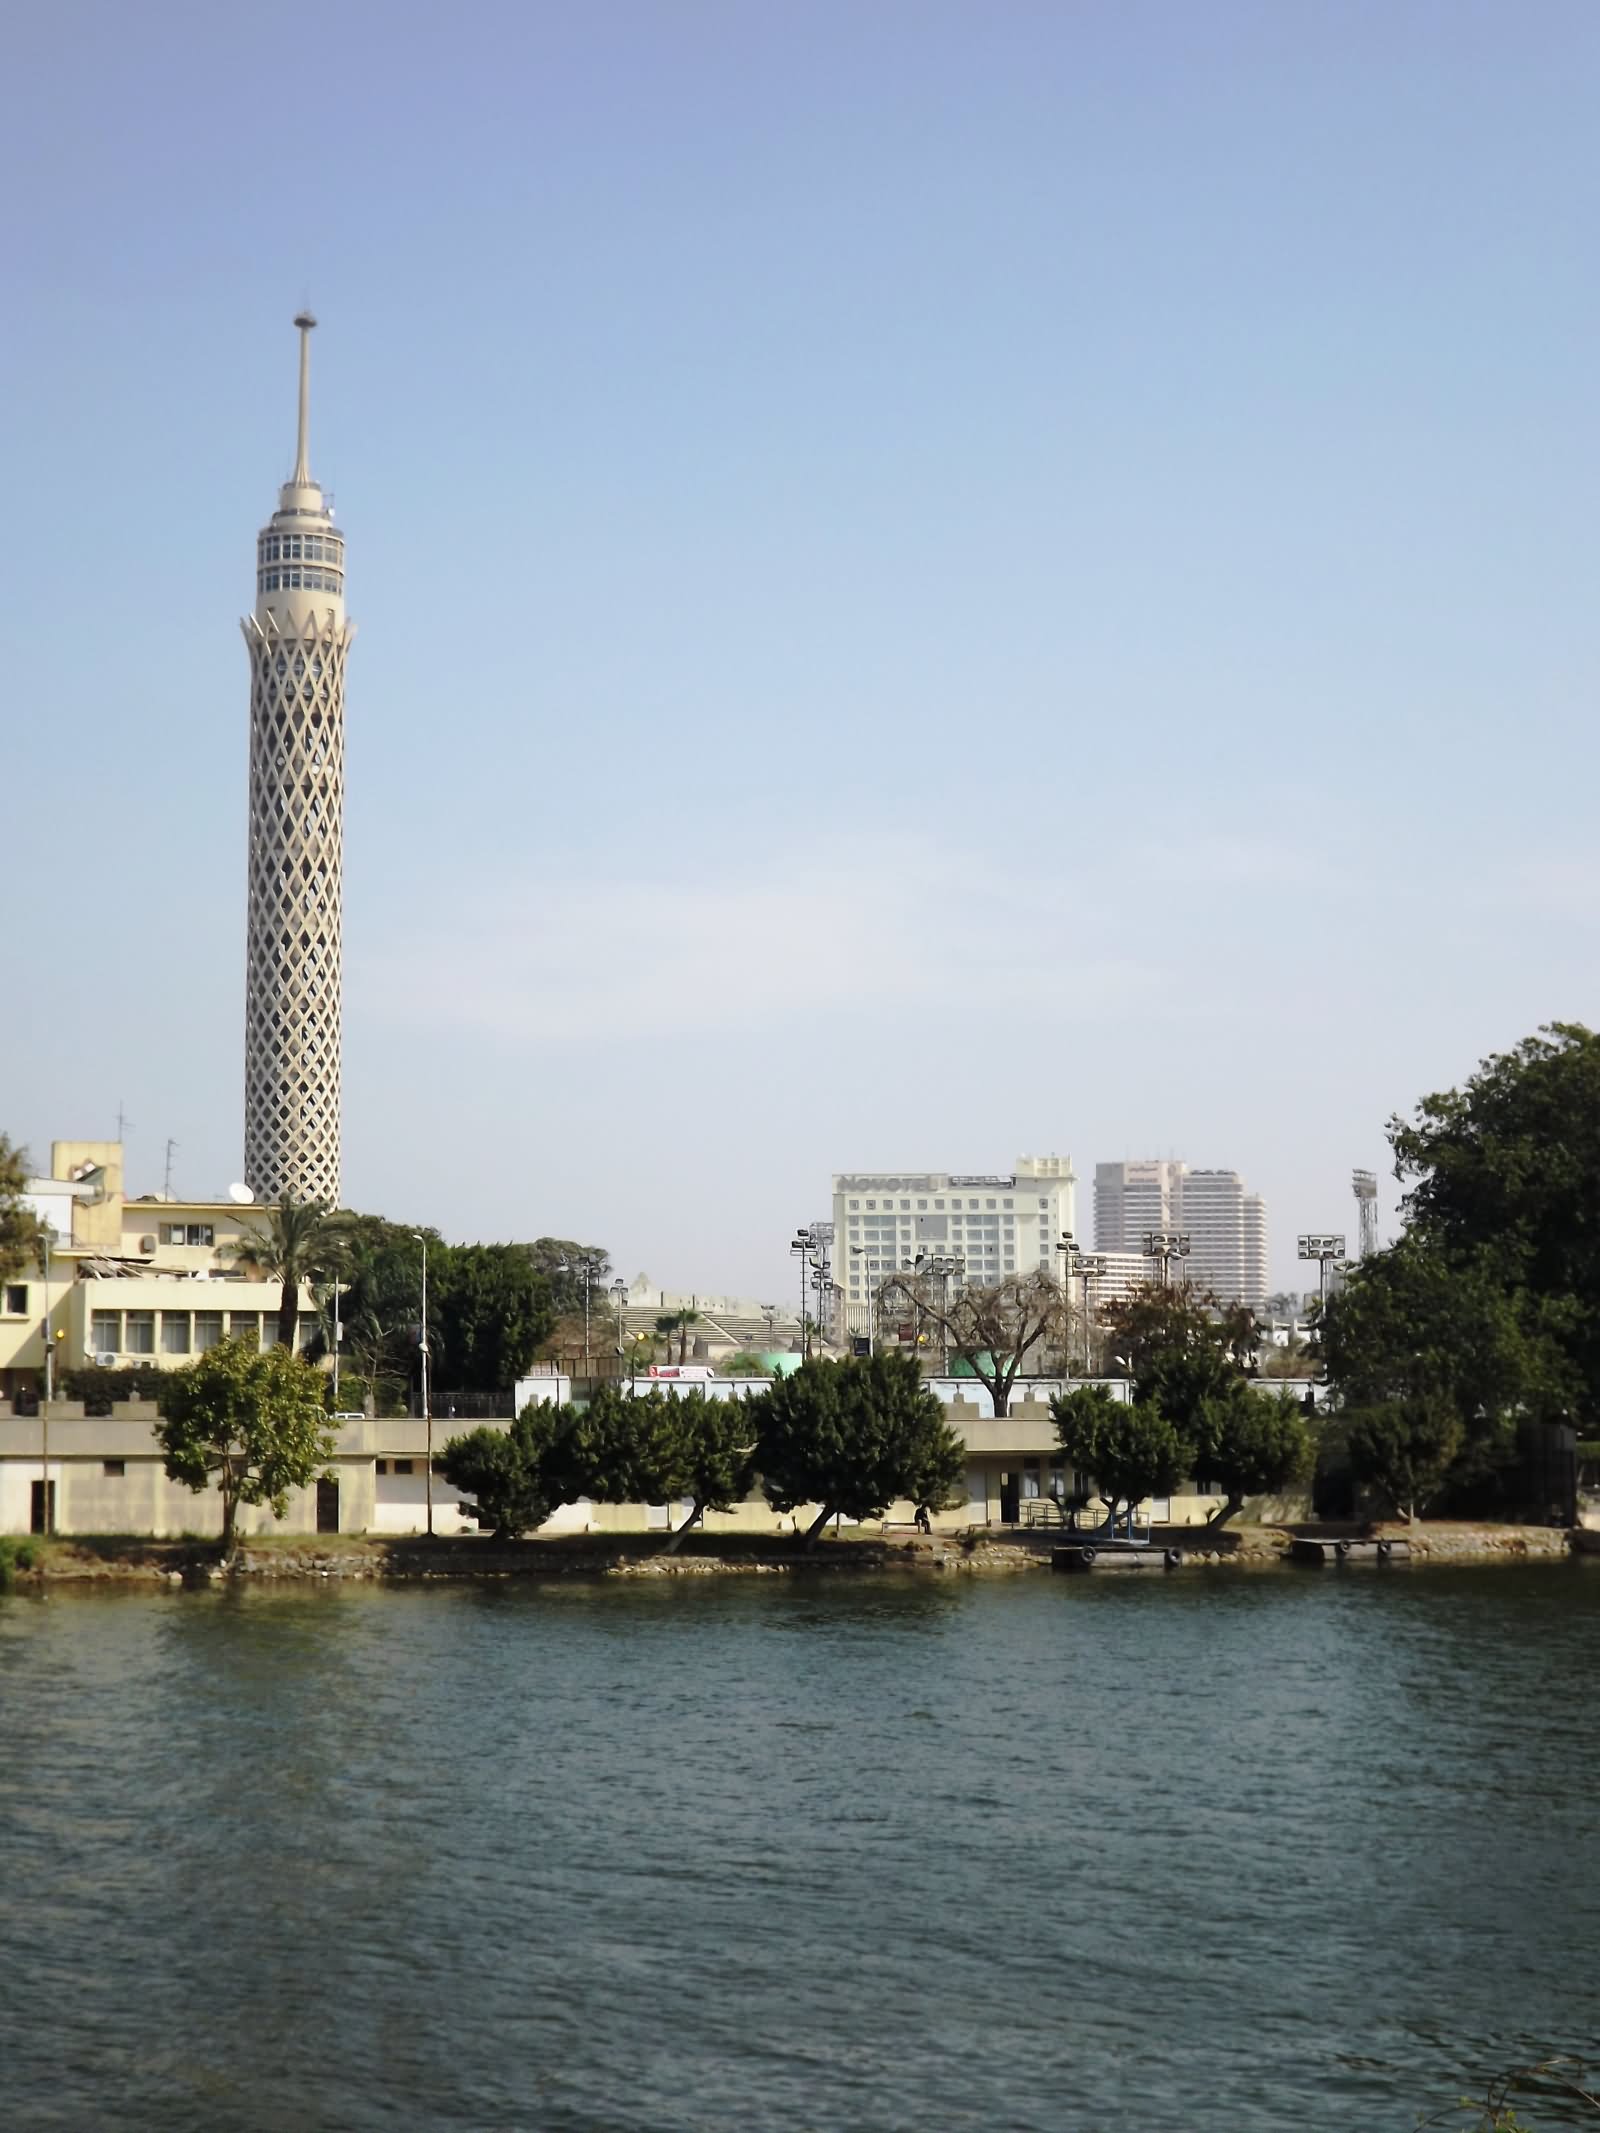 The Cairo Tower View Across The River